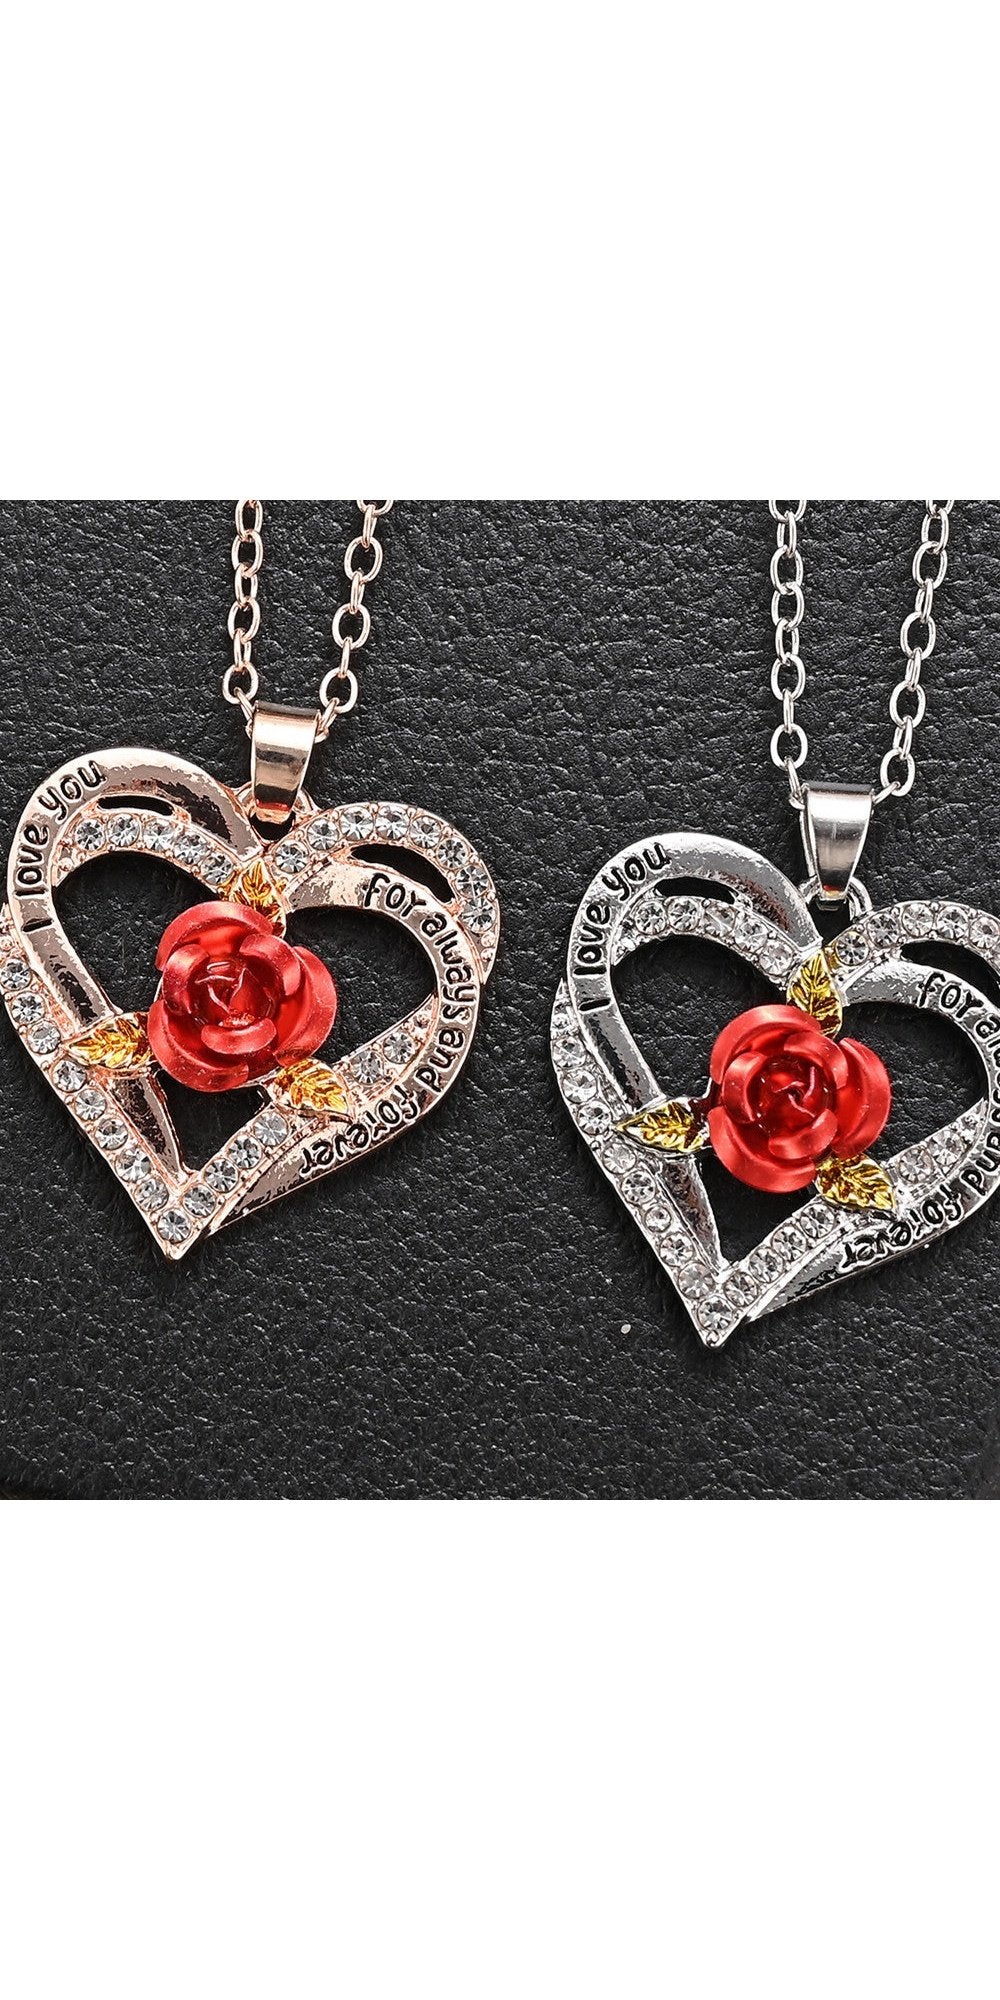 Women's Fashion Love Rose Necklace